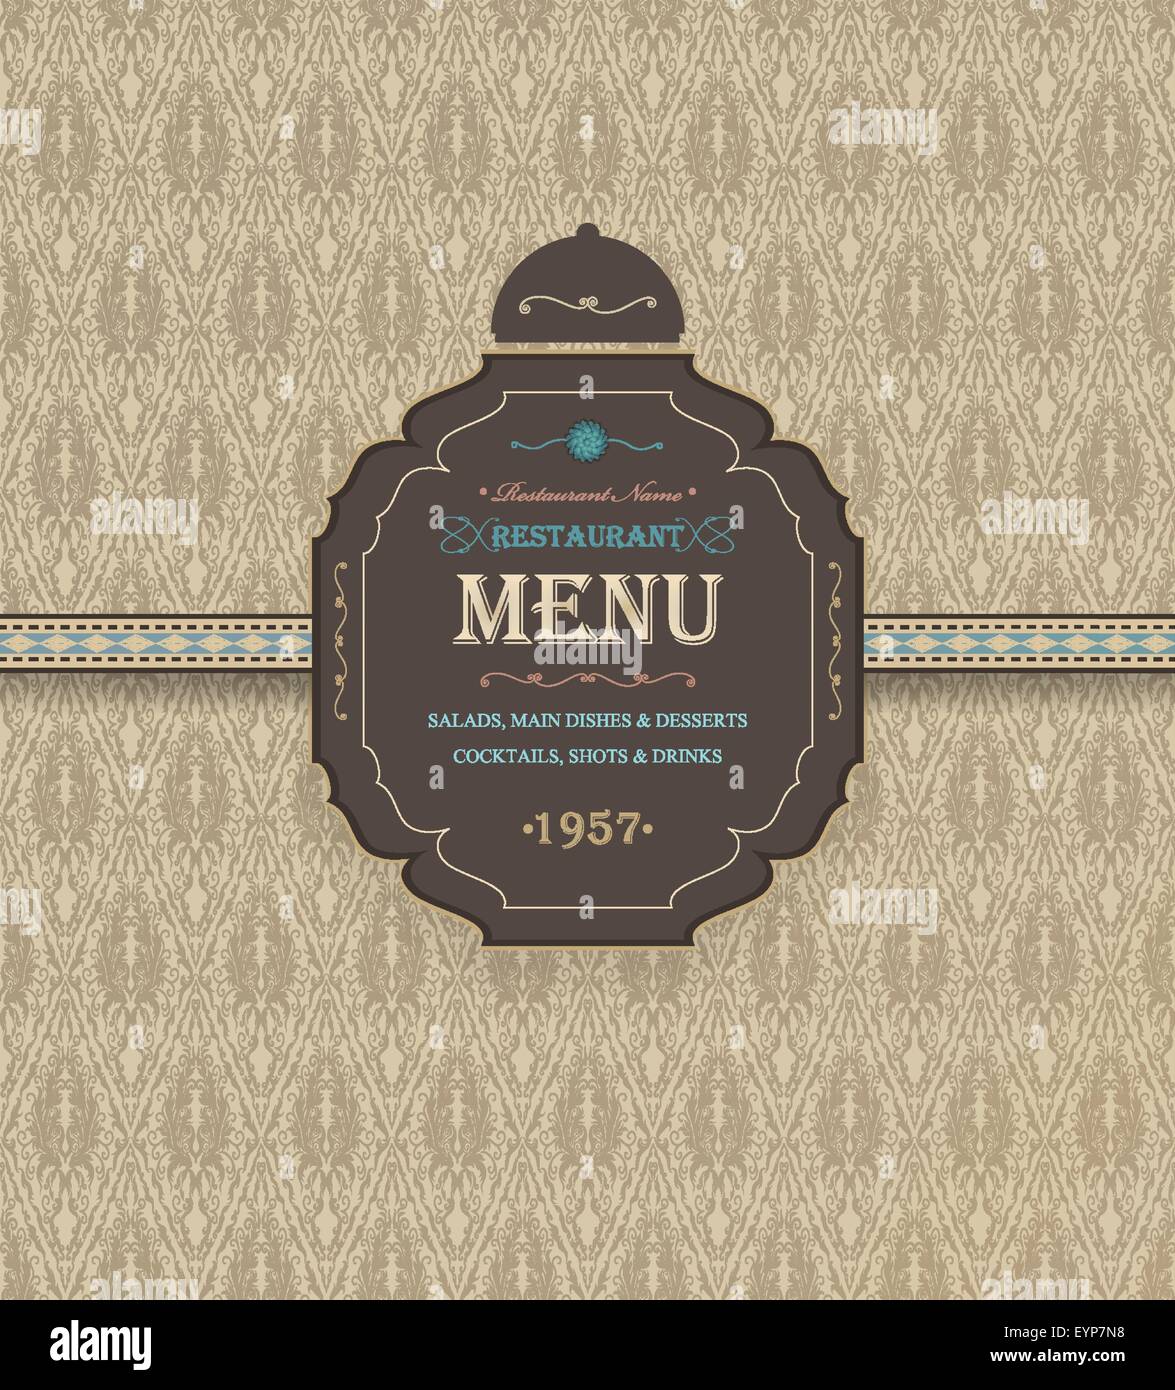 Vintage Restaurant Menu With Ornate Background And Title Inscription Stock Vector